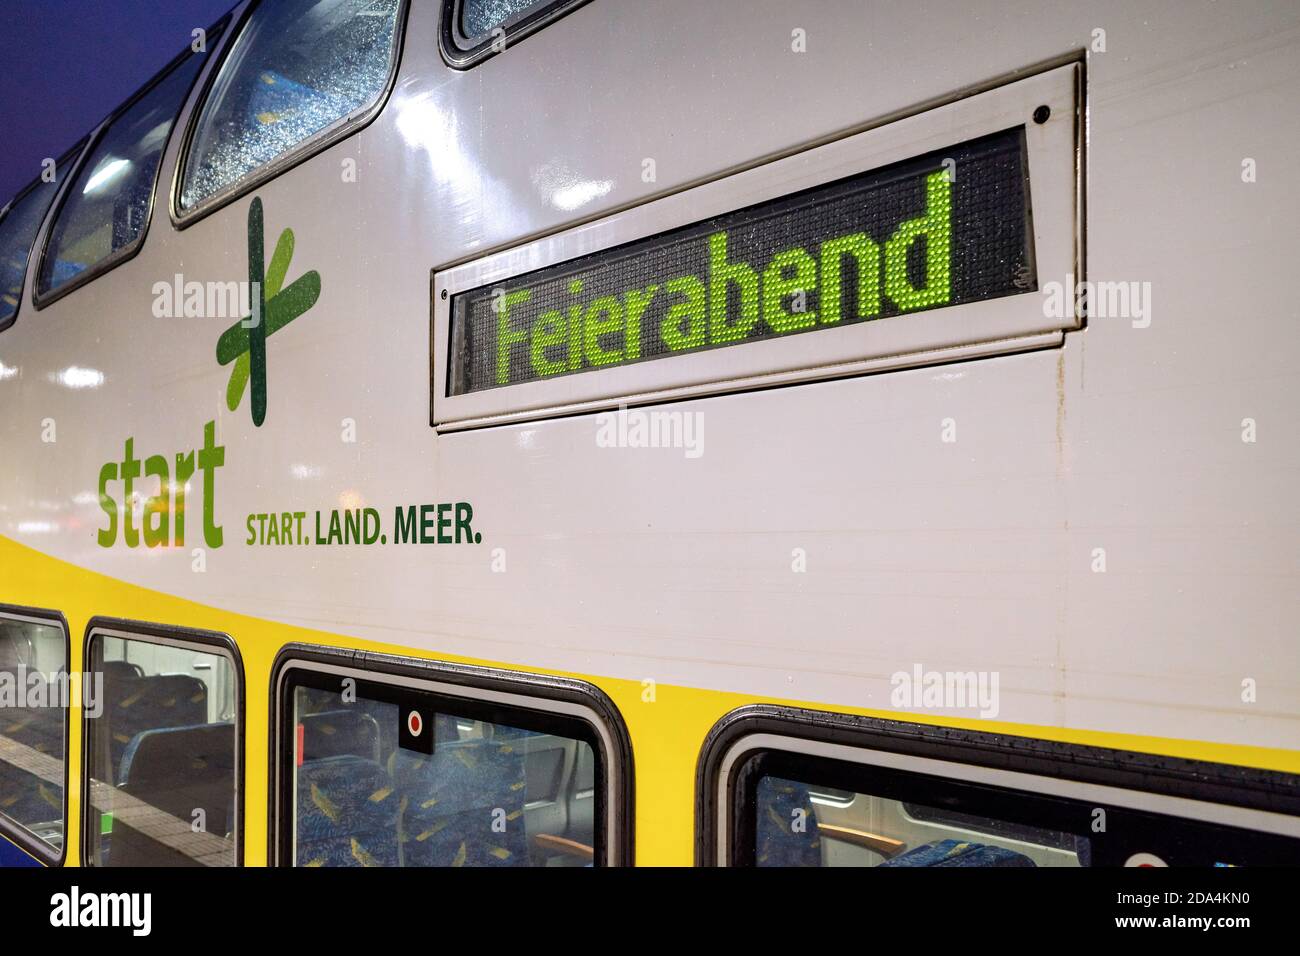 Start regional train with destination ‘Feierabend’ (‘home time’) at Cuxhaven railway station. Stock Photo